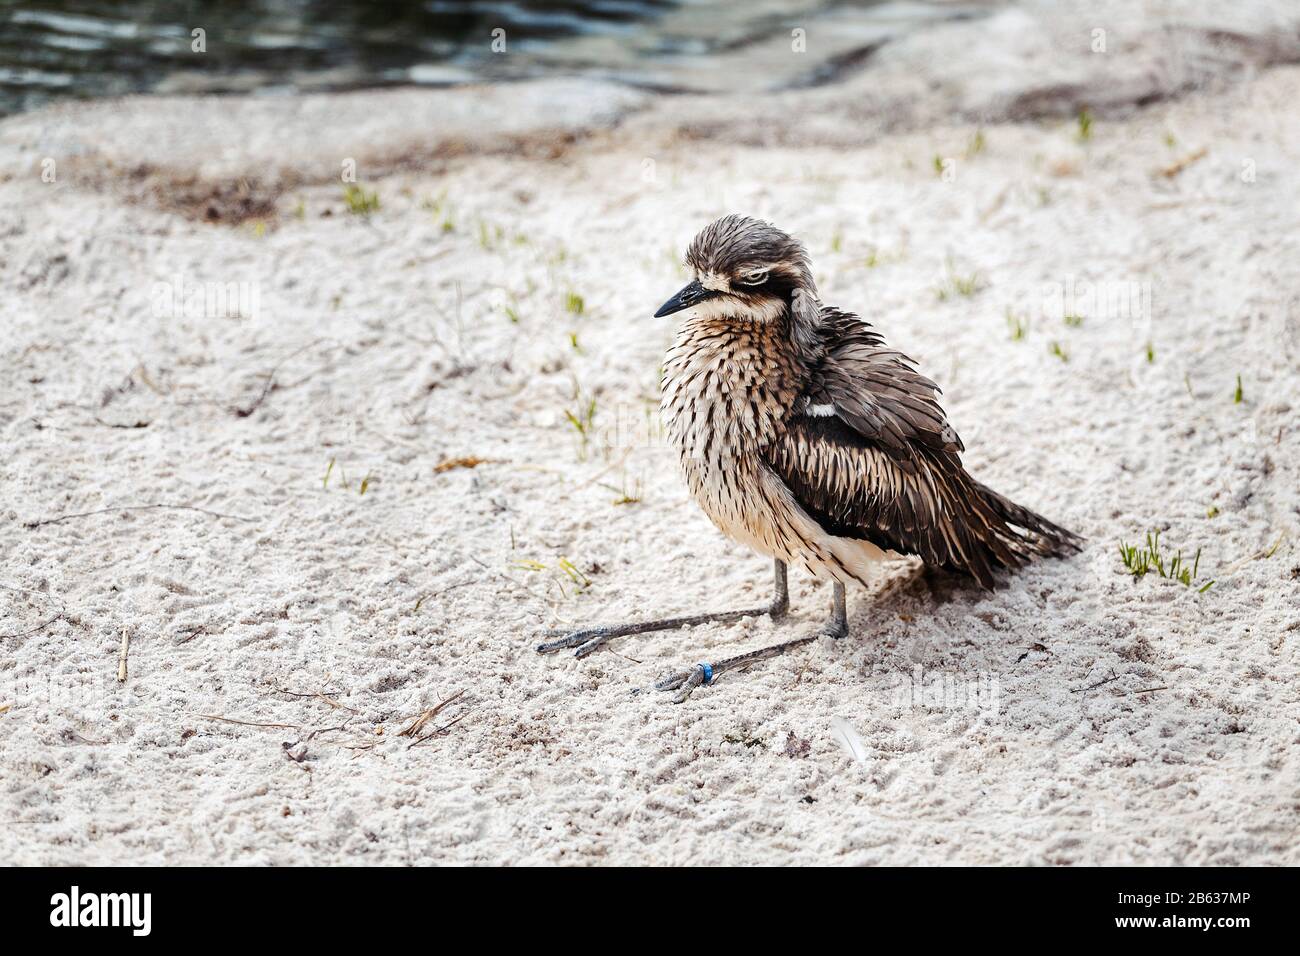 Small rare water birds with funny long legs and ridiculous stare Stock Photo